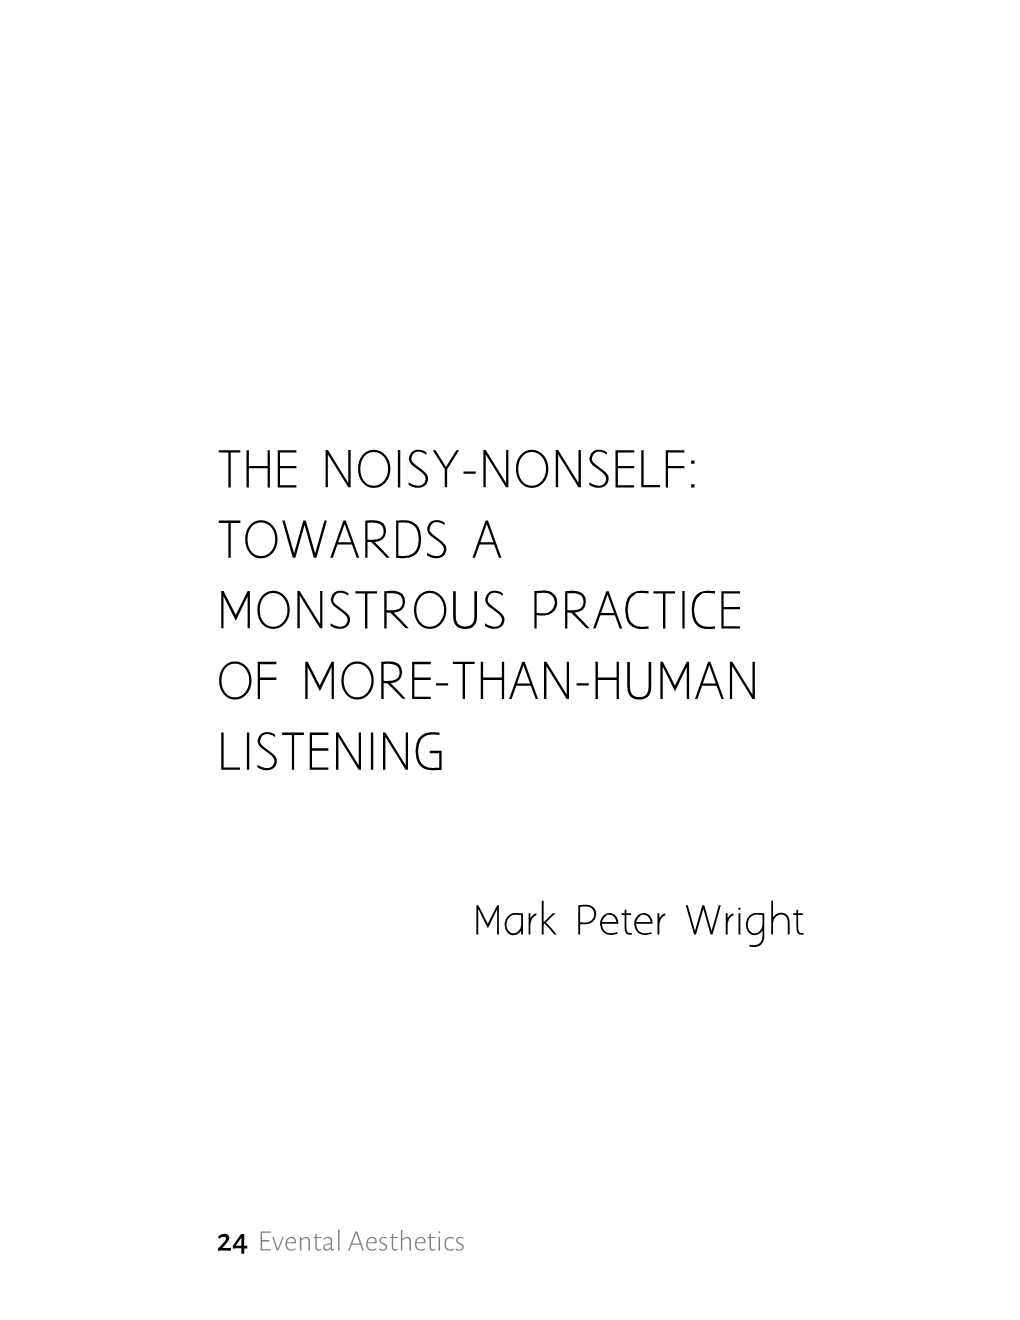 The Noisy-Nonself: Towards a Monstrous Practice of More-Than-Human Listening